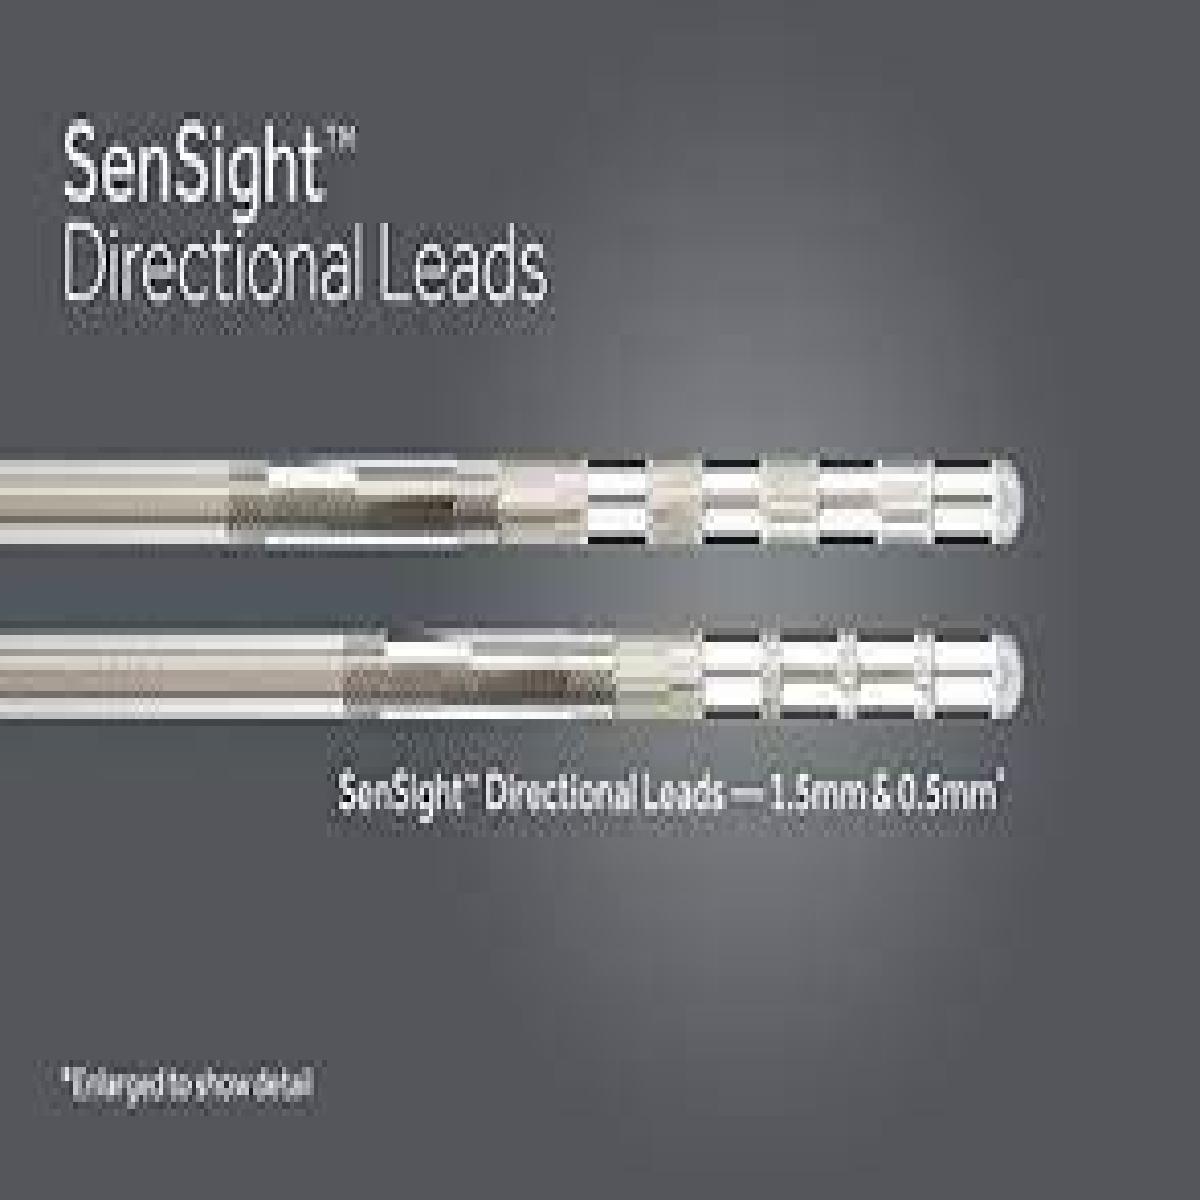 Medtronic Launches SenSight™ Directional Lead System for Deep Brain Stimulation Therapy in India